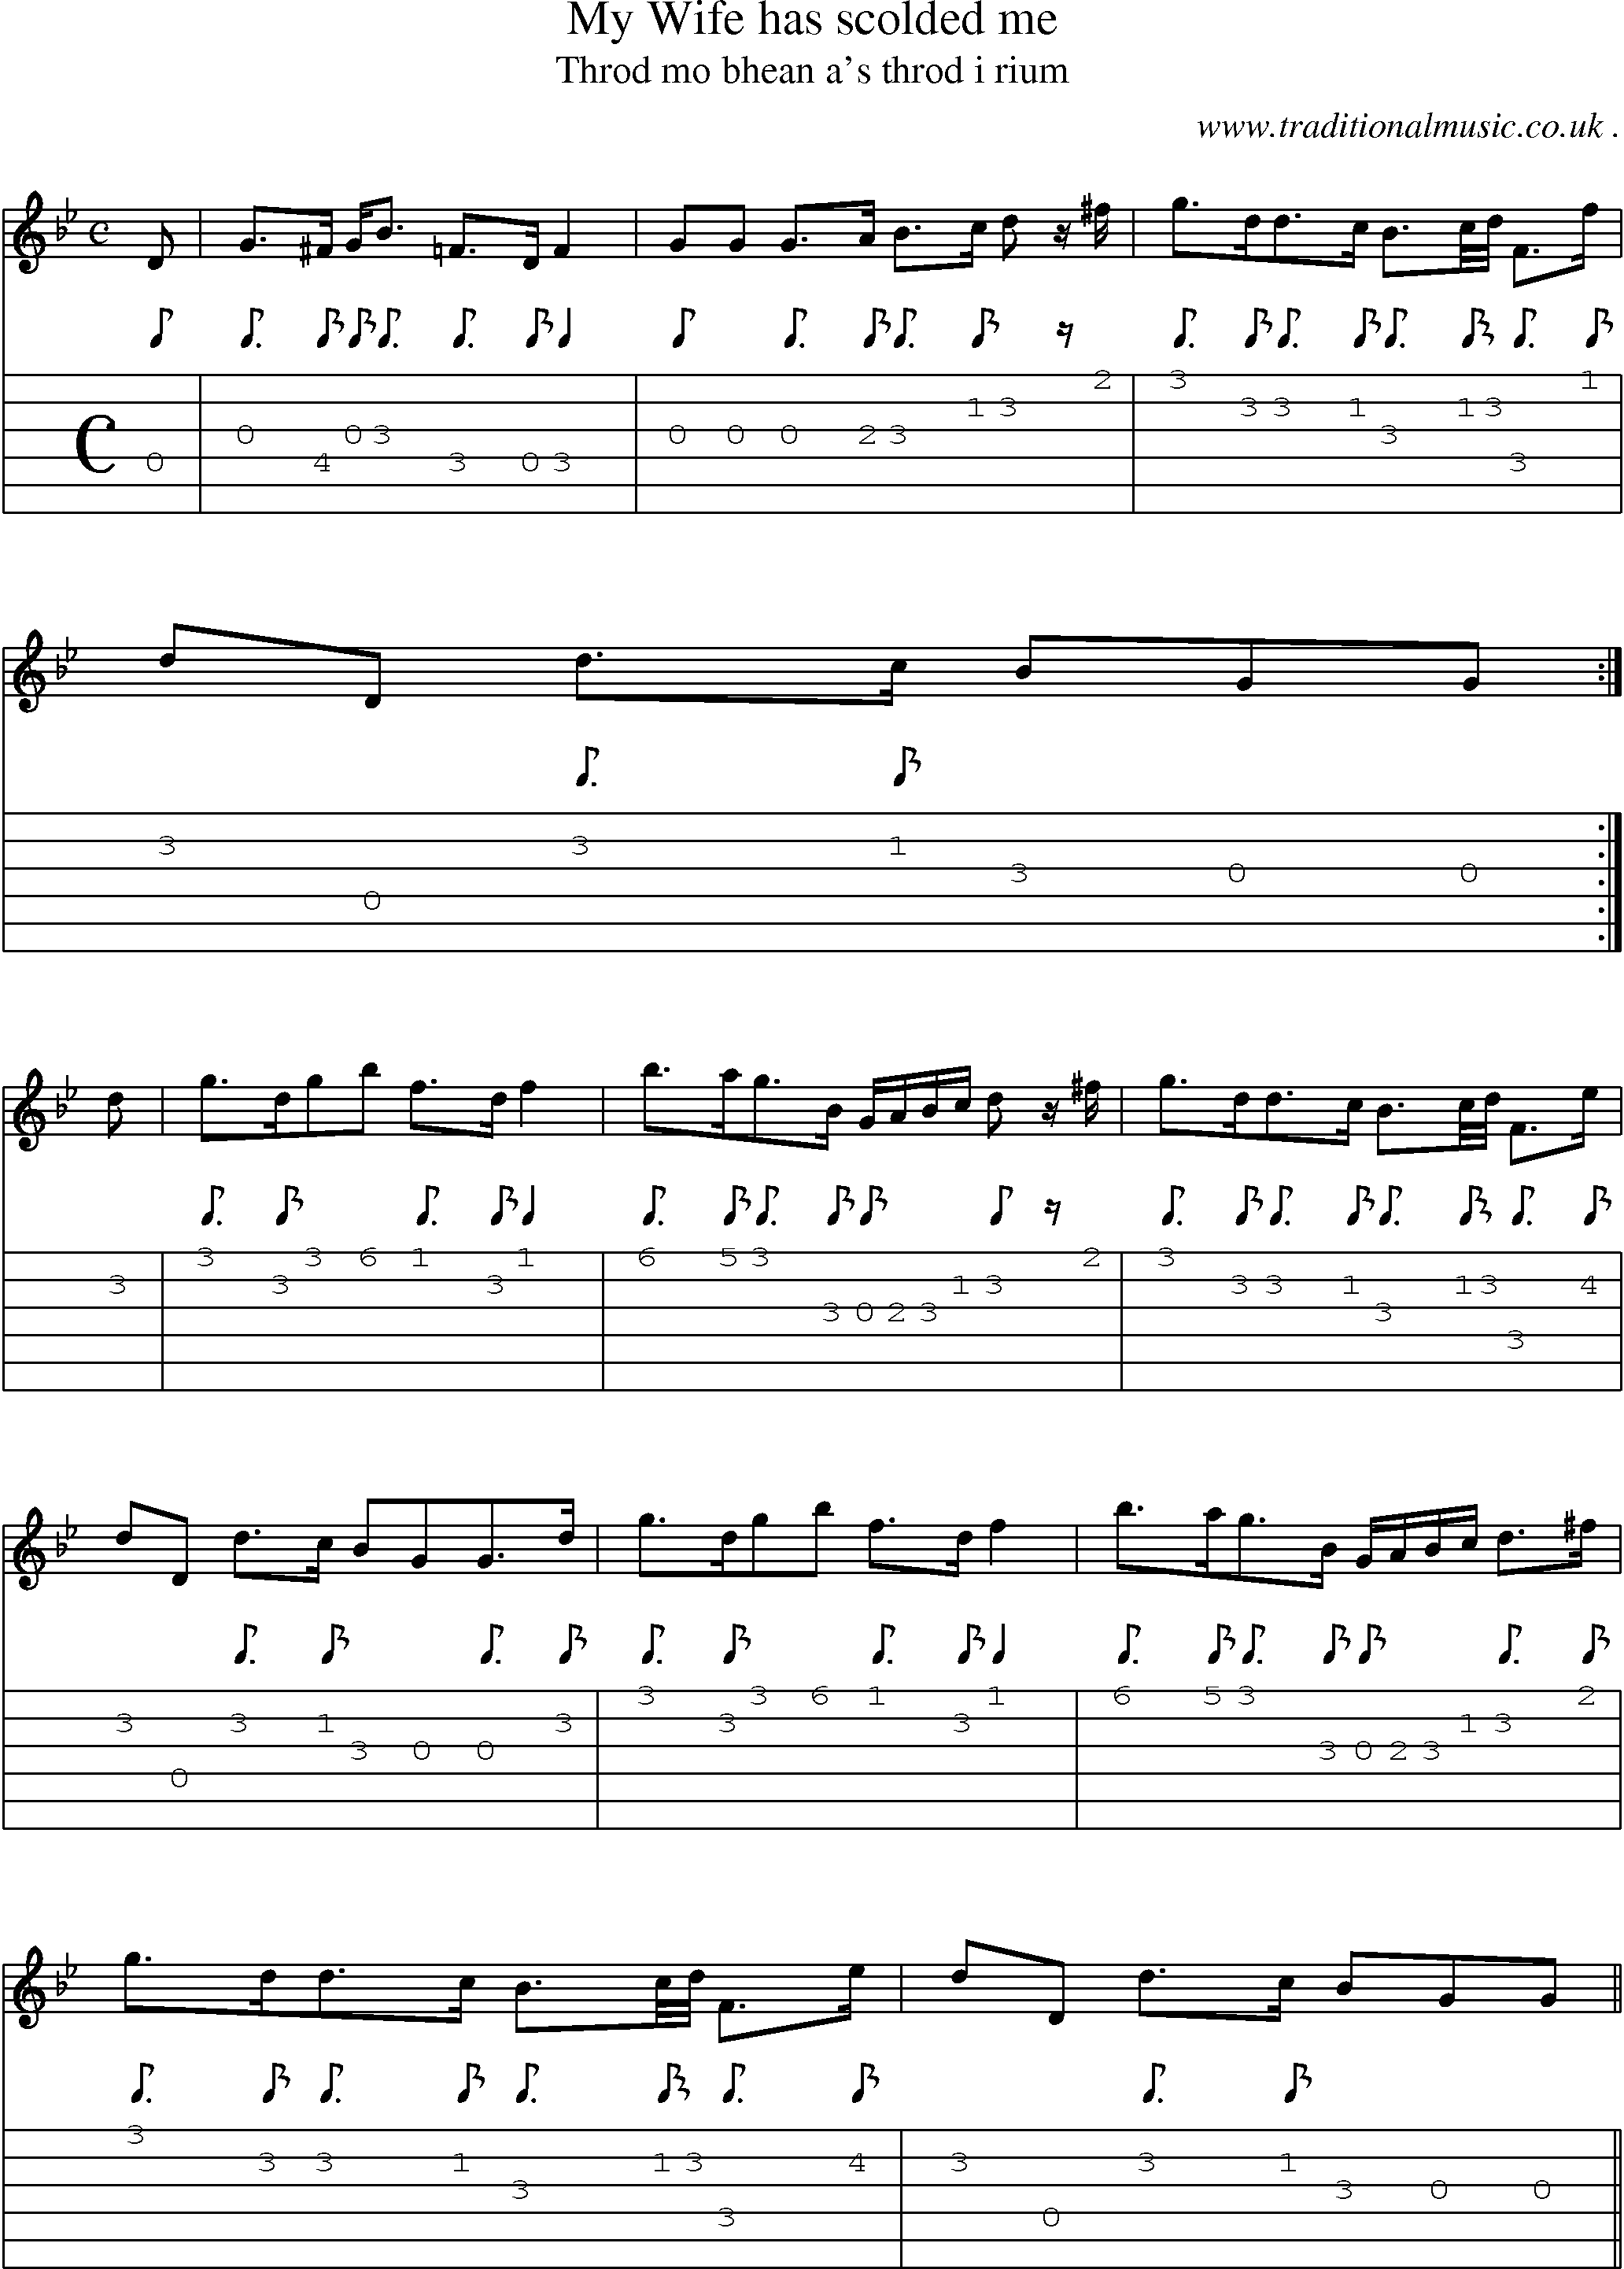 Sheet-music  score, Chords and Guitar Tabs for My Wife Has Scolded Me